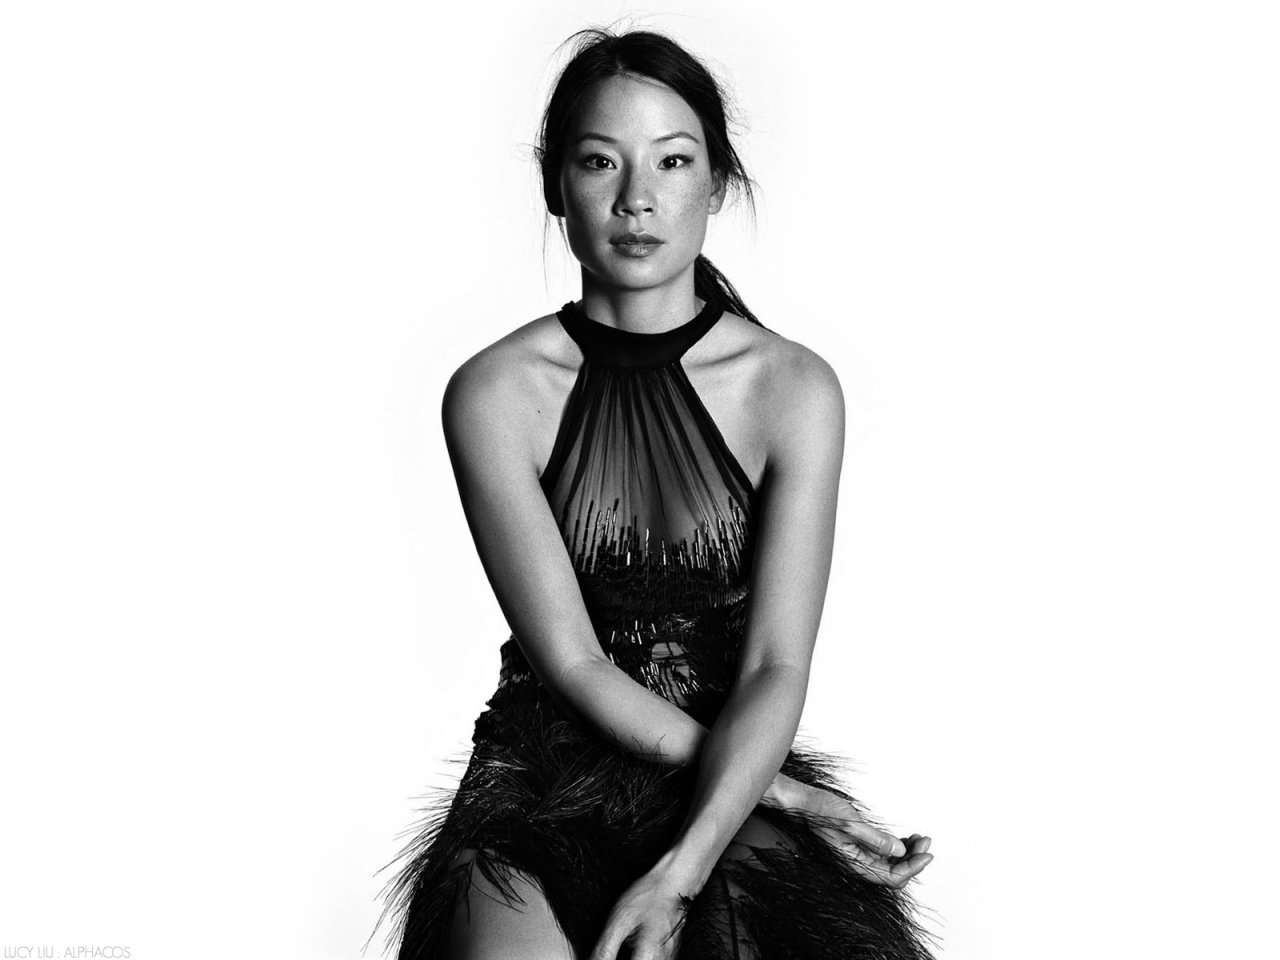 Lucy Liu Leaked Photos 93805 Best Celebrity Lucy Liu Leaked Wallpapers